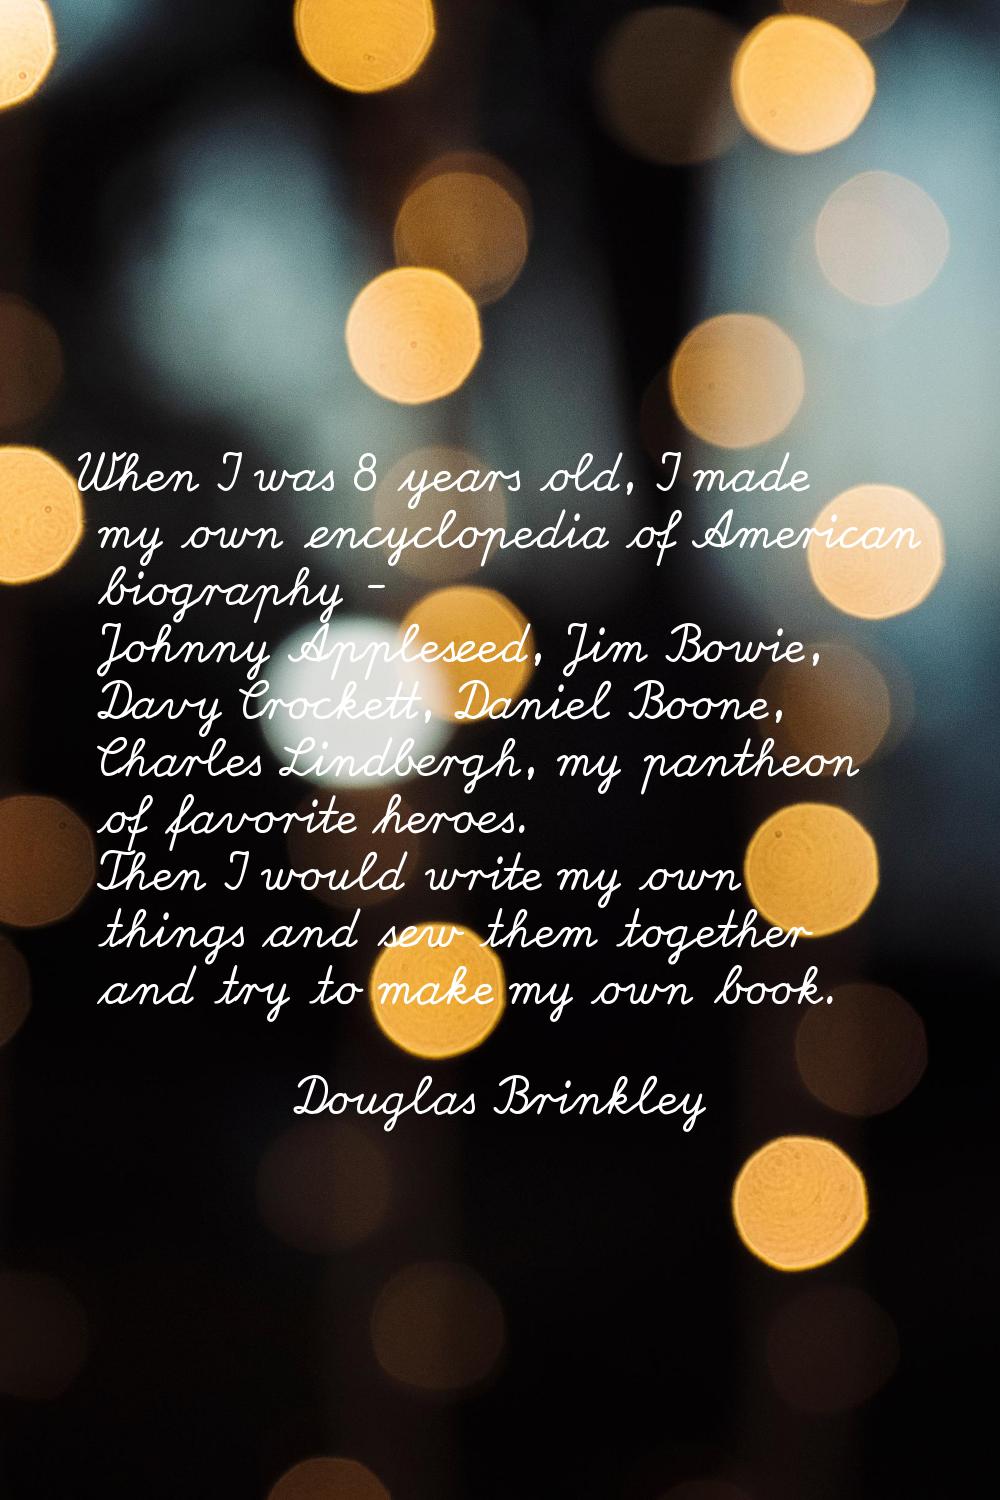 When I was 8 years old, I made my own encyclopedia of American biography - Johnny Appleseed, Jim Bo